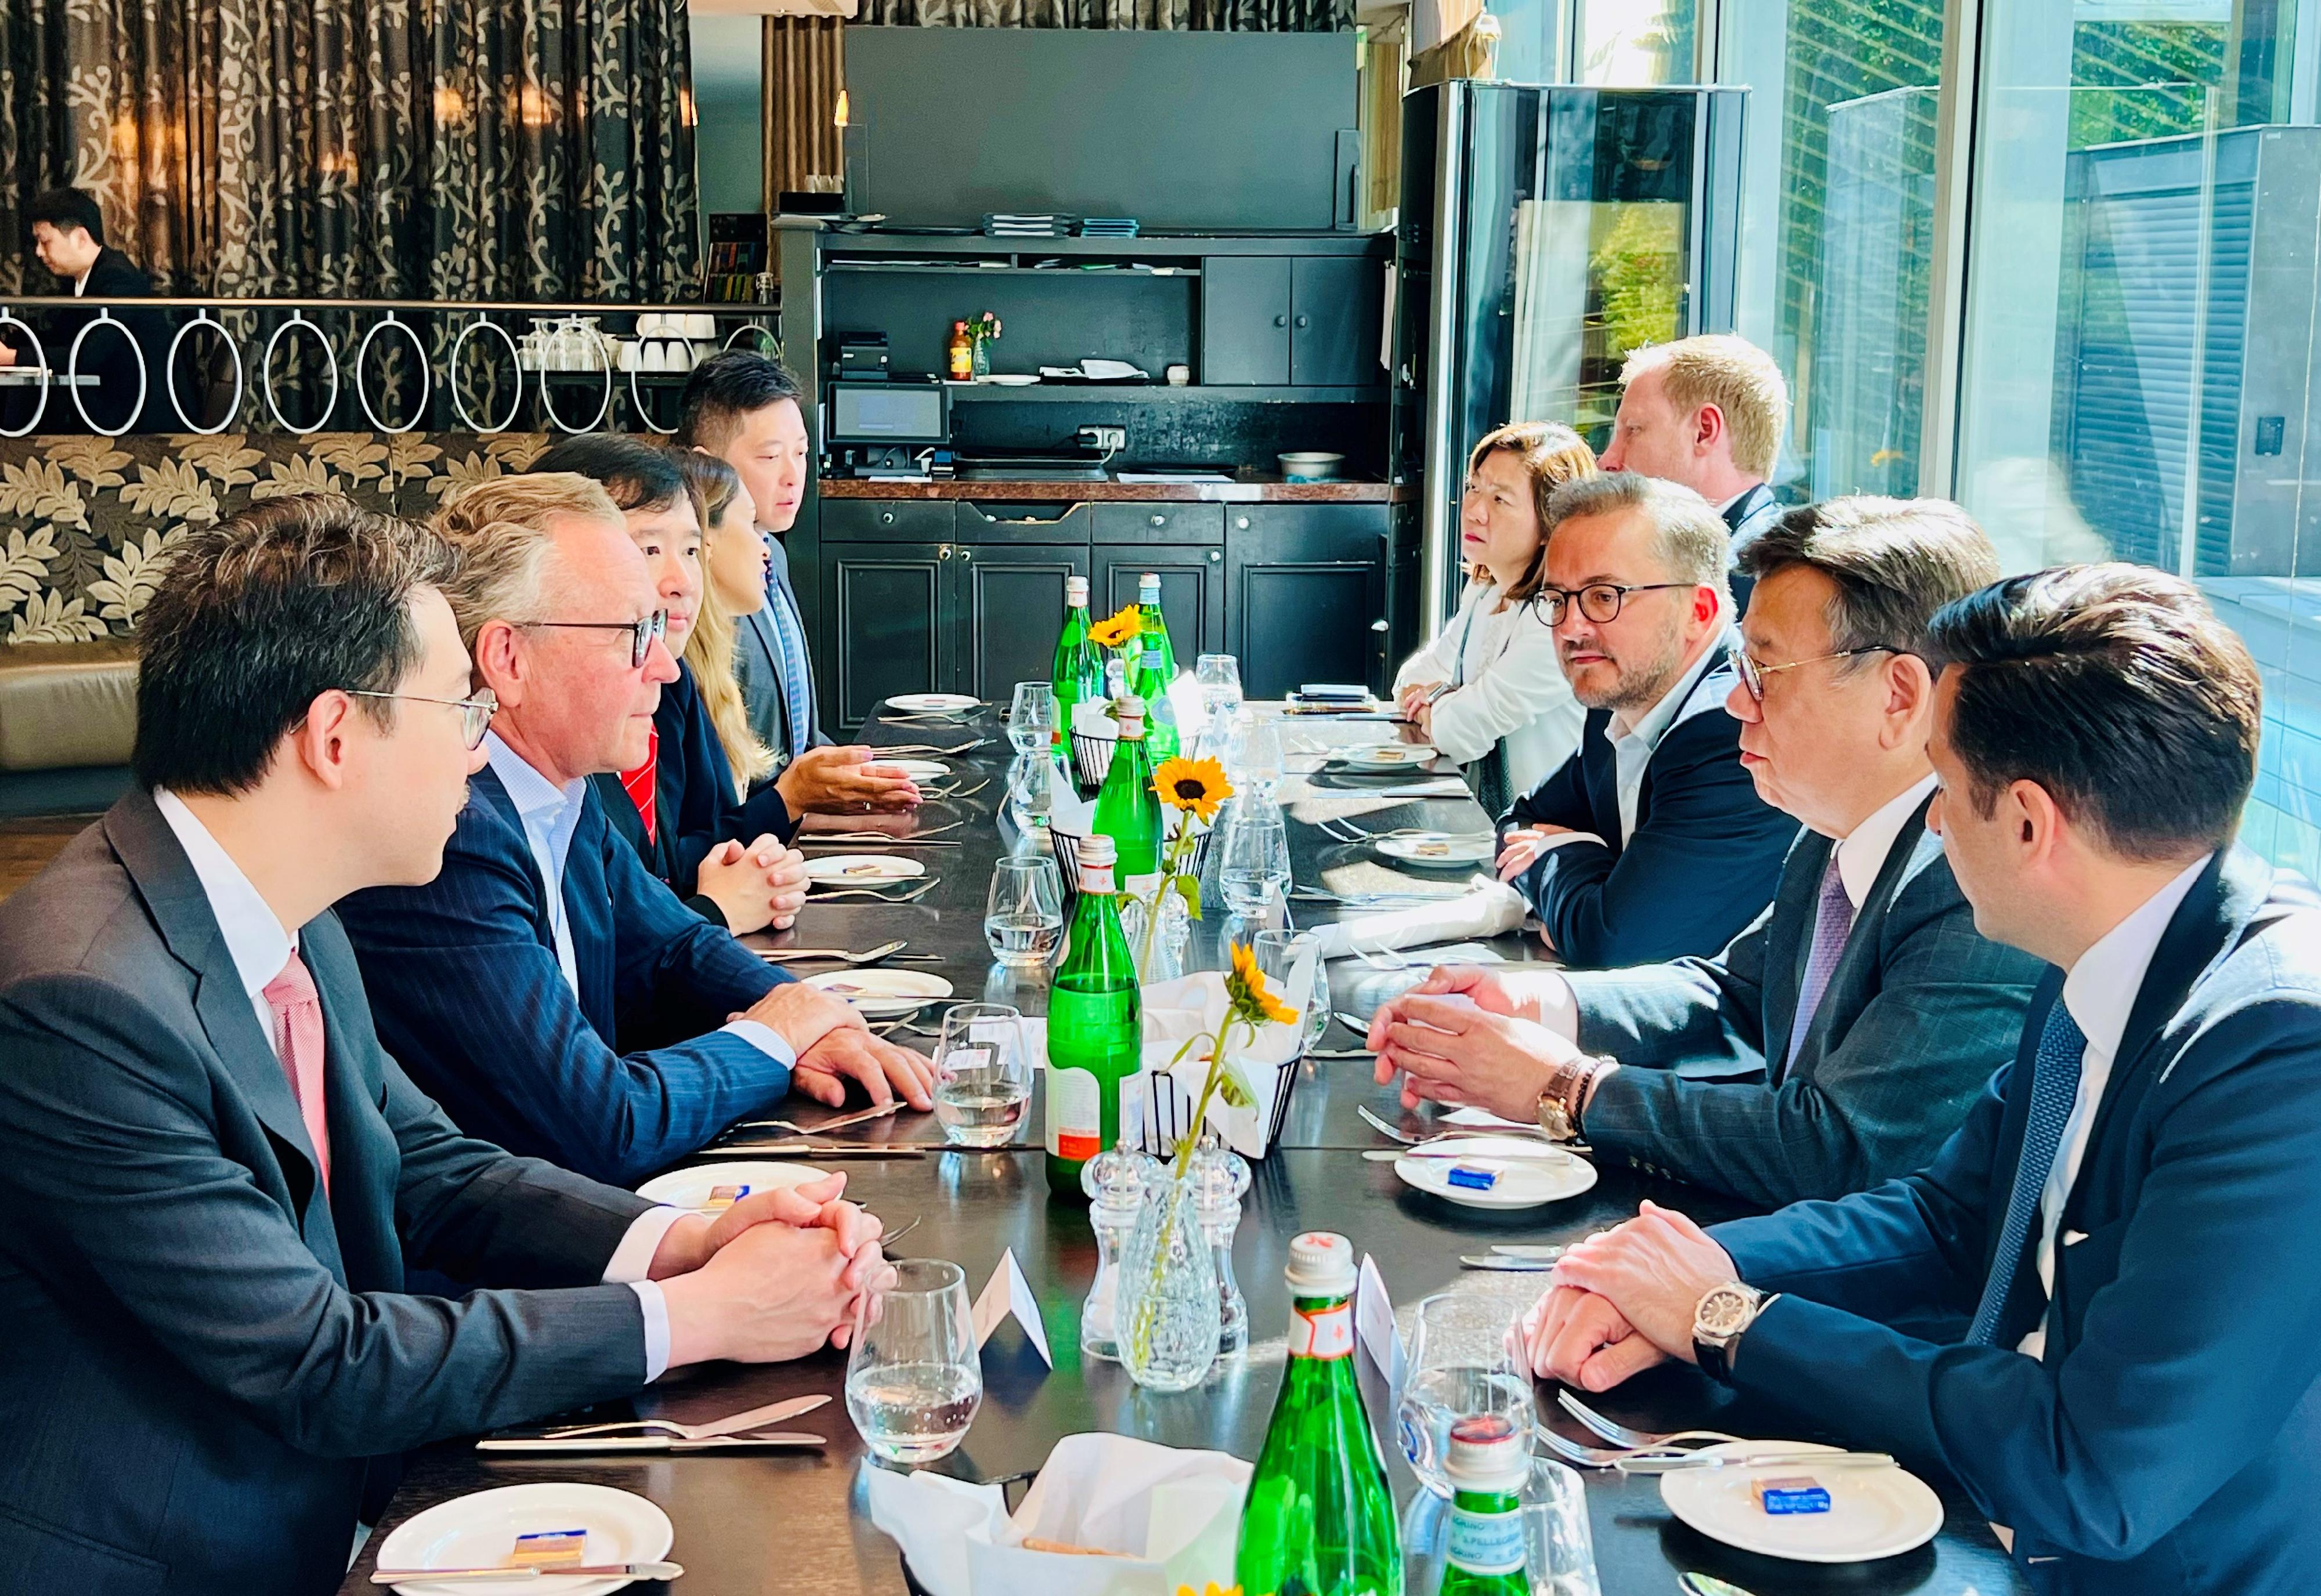 The Secretary for Commerce and Economic Development, Mr Algernon Yau (second right), had a lunch meeting with members of the German Chamber of Commerce and Industry for Munich and Upper Bavaria in Munich, Germany, on September 6 (Munich time) to give them an update on the Guangdong-Hong Kong-Macao Greater Bay Area development and exchange views on enhancing trade and business co-operation. The Under Secretary for Constitutional and Mainland Affairs, Mr Clement Woo (third left), and the Acting Director-General of Investment Promotion, Dr Jimmy Chiang (first left), also attended the meeting.